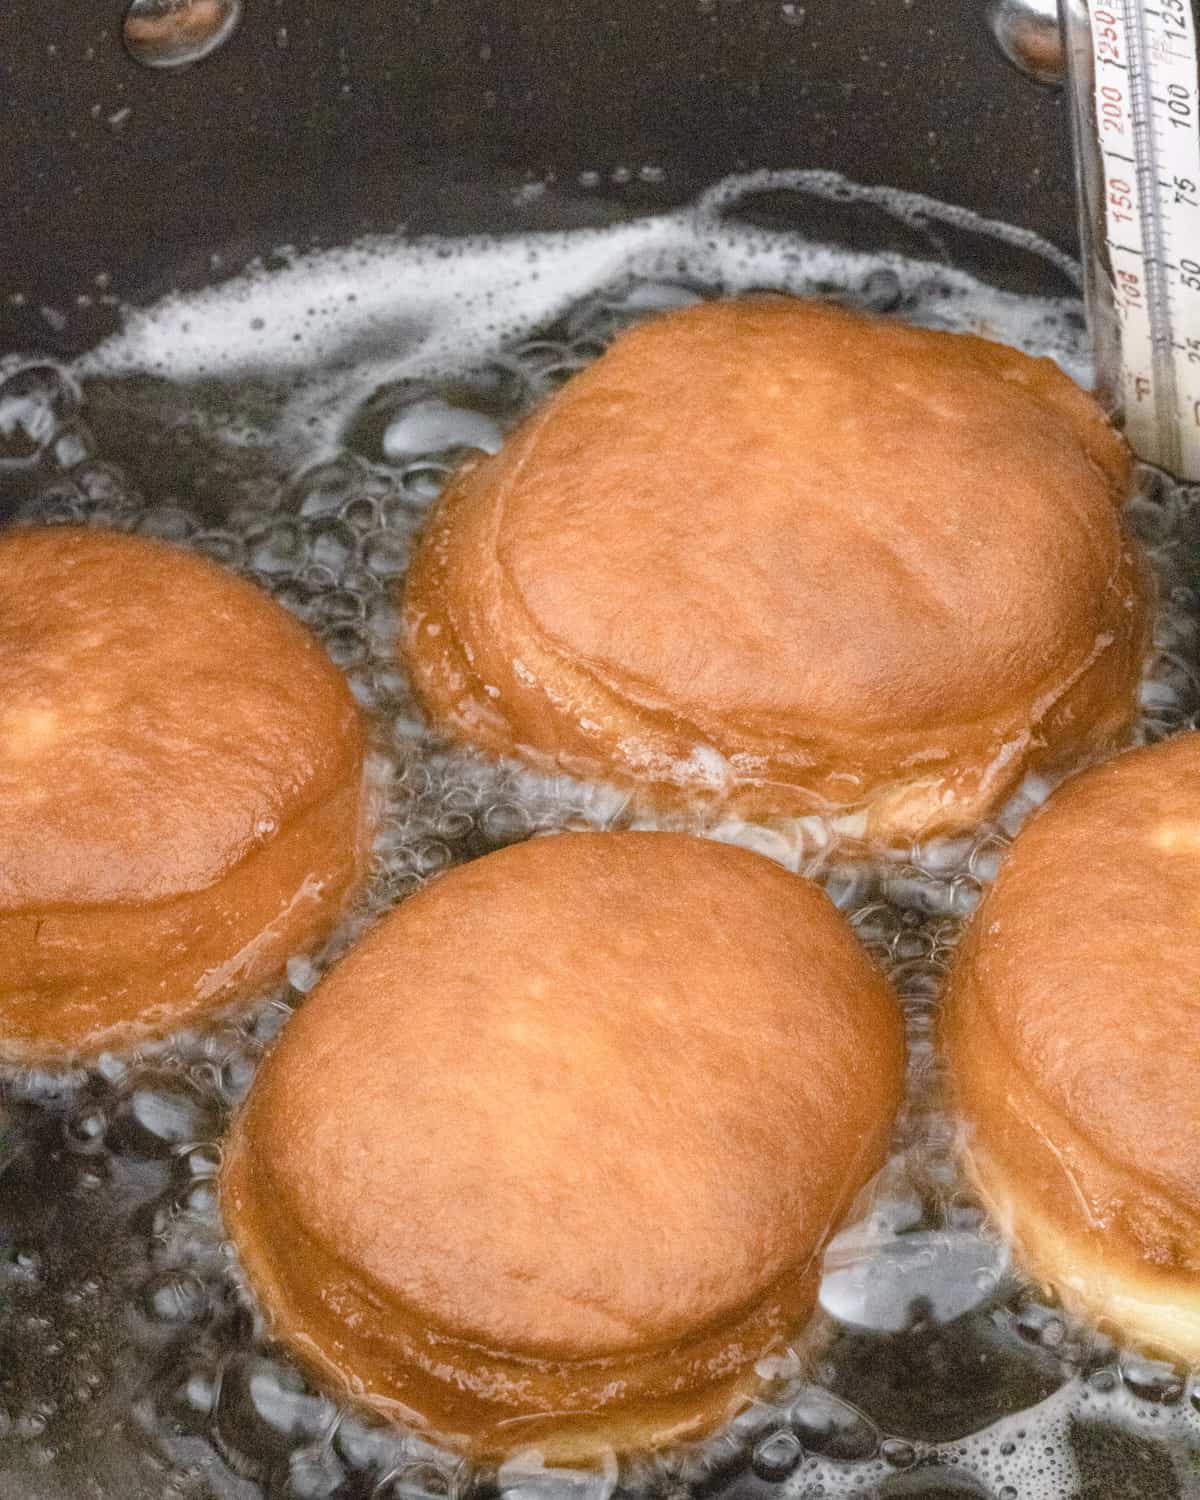 4 donuts fried in hot oil. They are medium-brown on top.